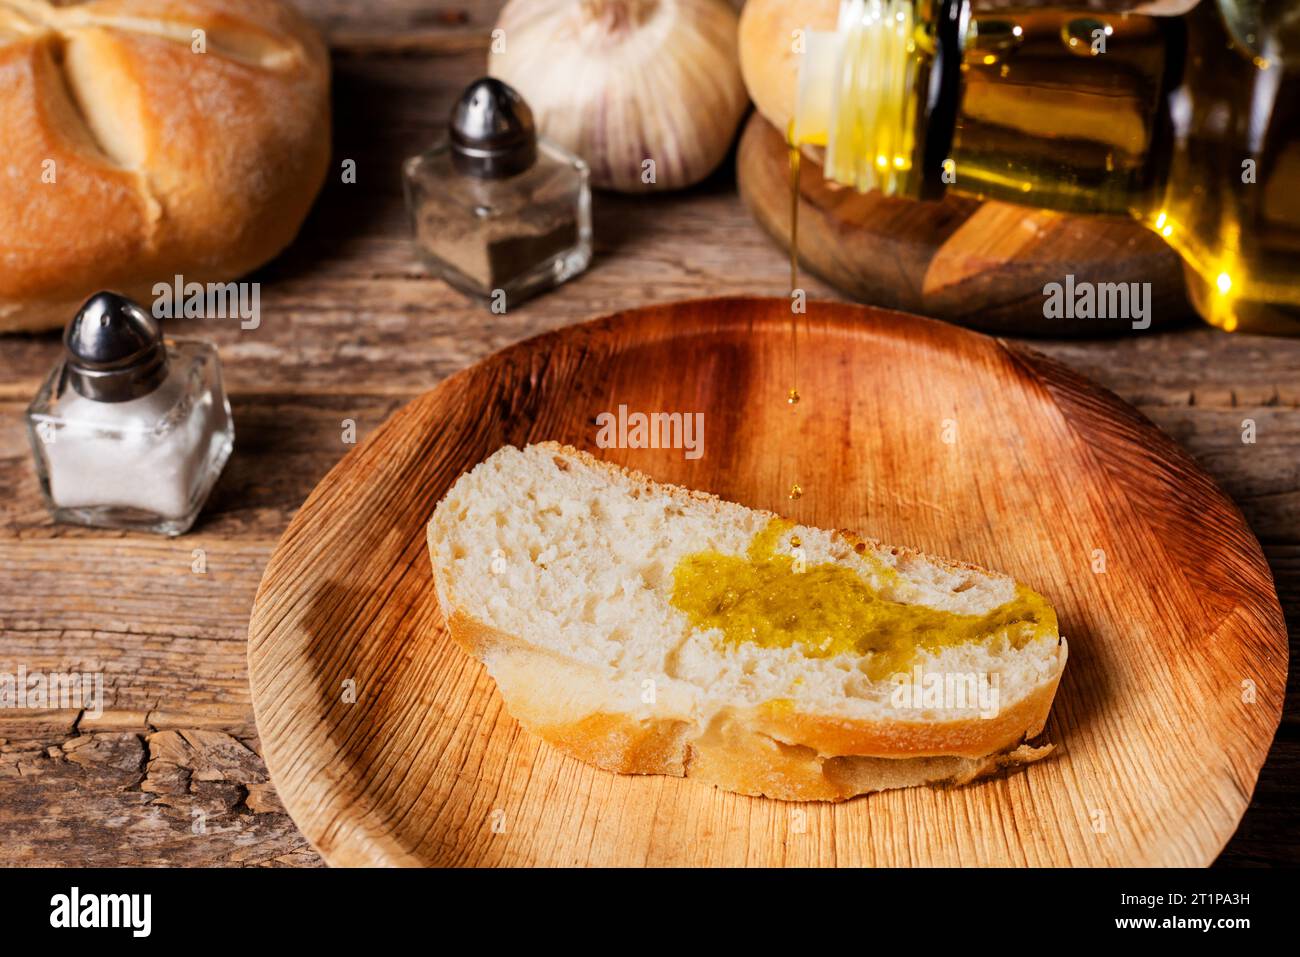 Bottle of olive oil pouring oil on a slice of bread, next to a shaker of salt, pepper, garlic and a piece of bread. Stock Photo